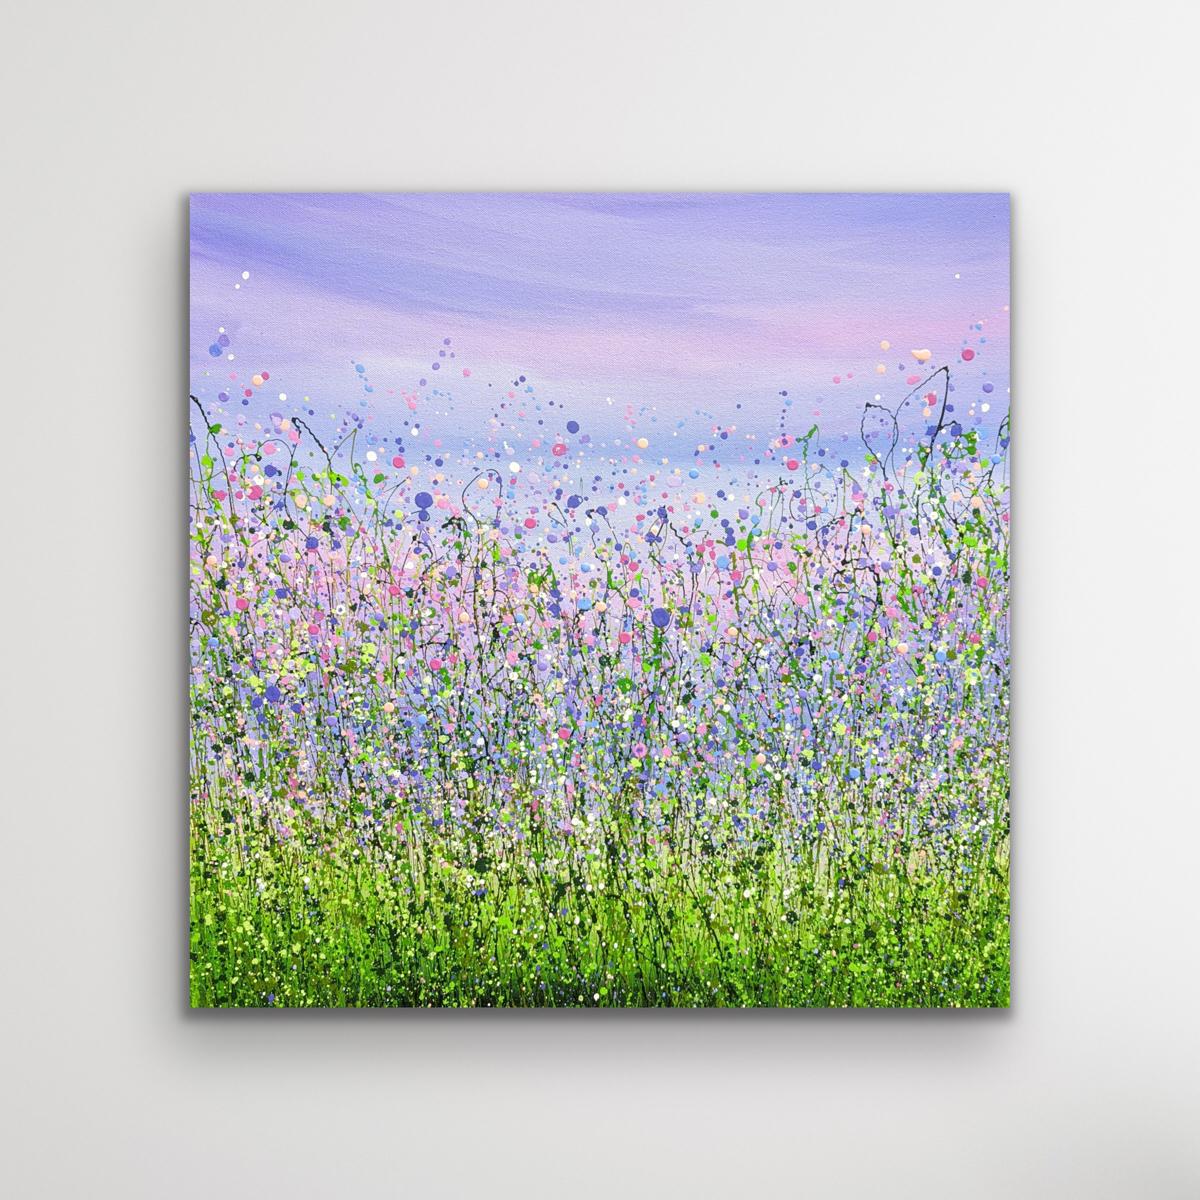 Wrapped Up In A Daydream #17, Expressionist Floral Landscape Painting, Meadows For Sale 2